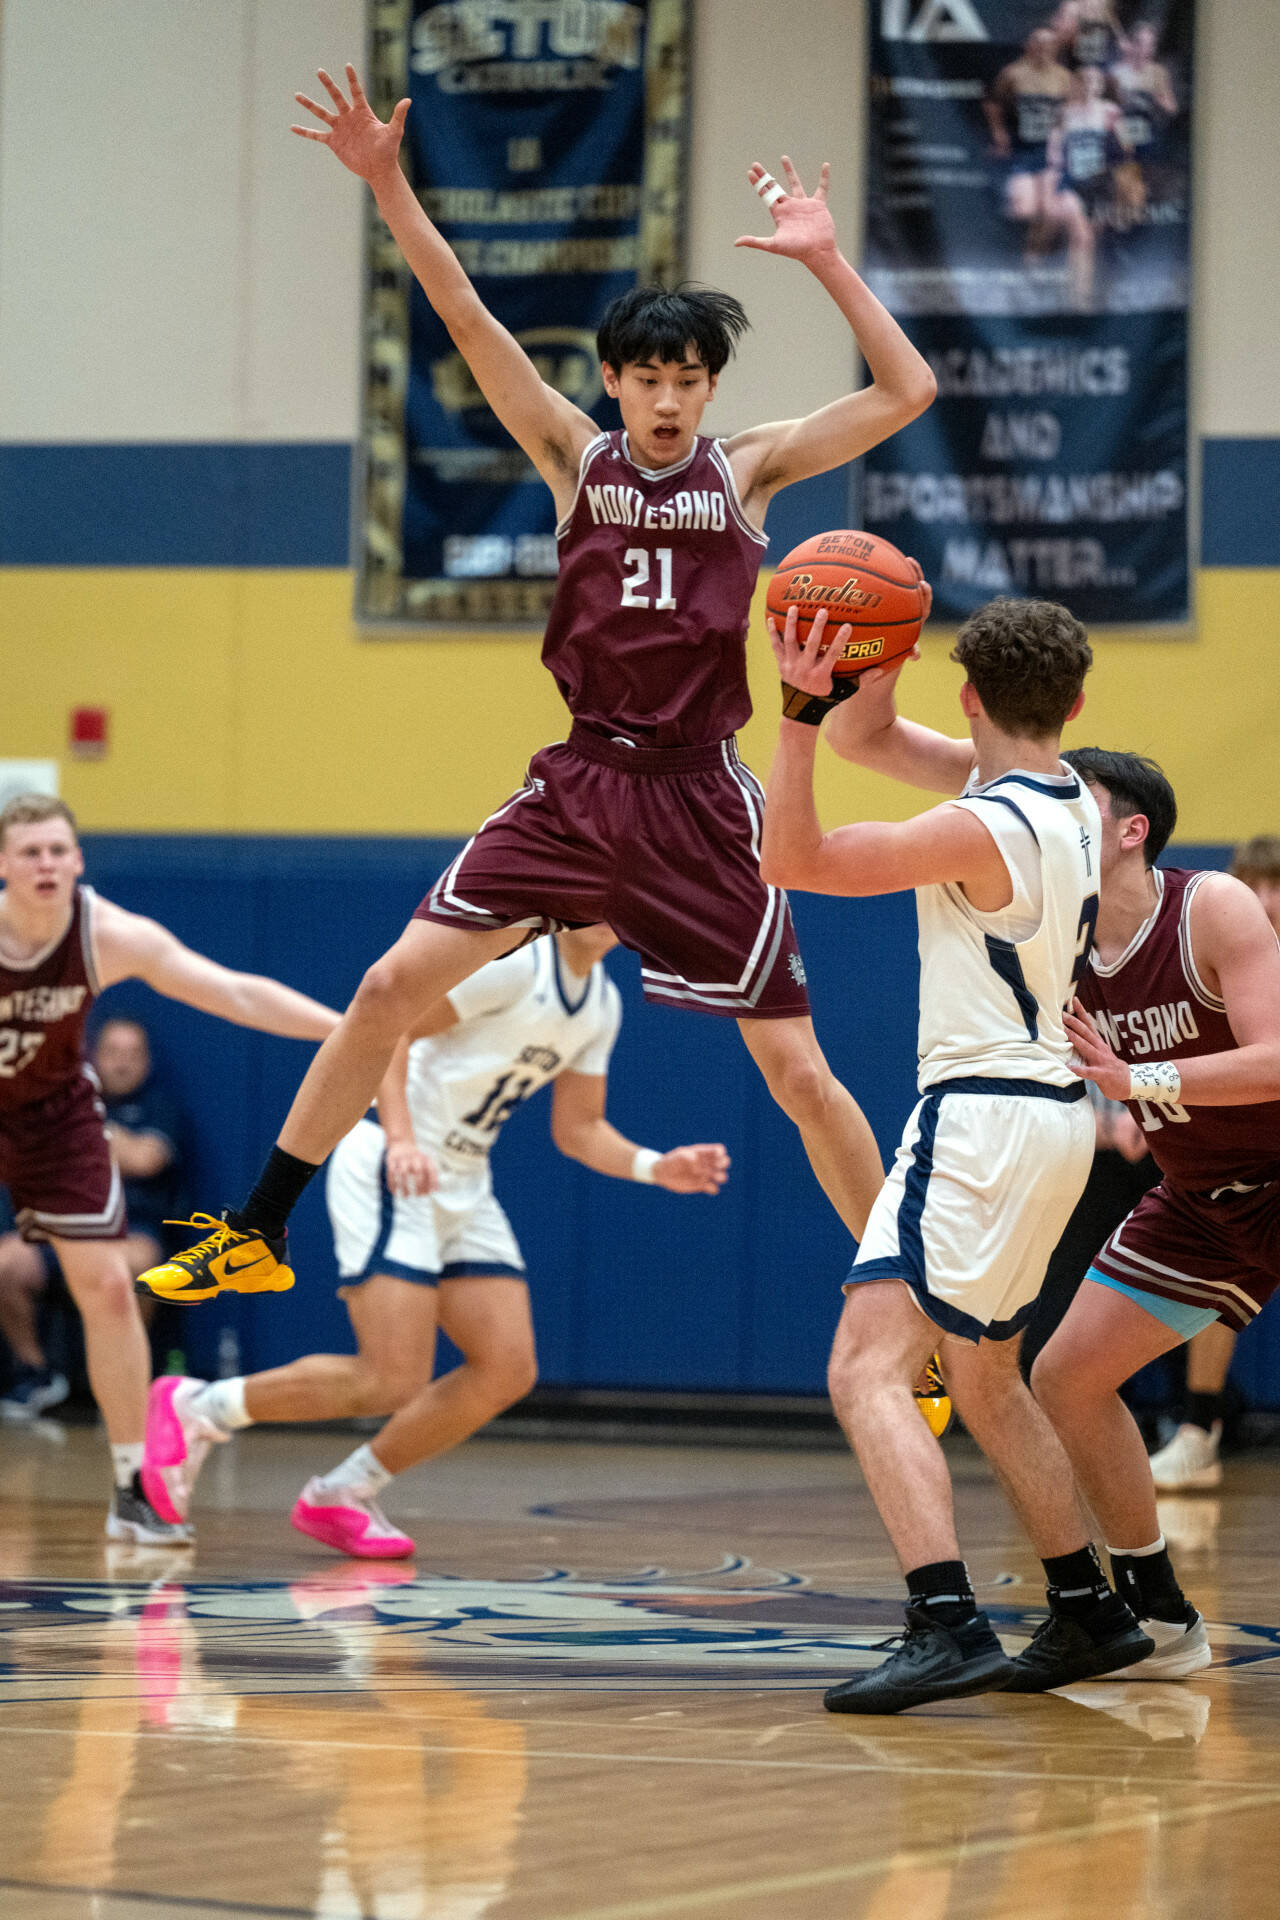 PHOTO BY FOREST WORGUM Montesano guard Delon Chan (21) defends Seton Catholic’s Brady Angelo during the Bulldogs’ 58-46 loss in a 1A District 4 Tournament semifinal game on Friday in Vancouver.